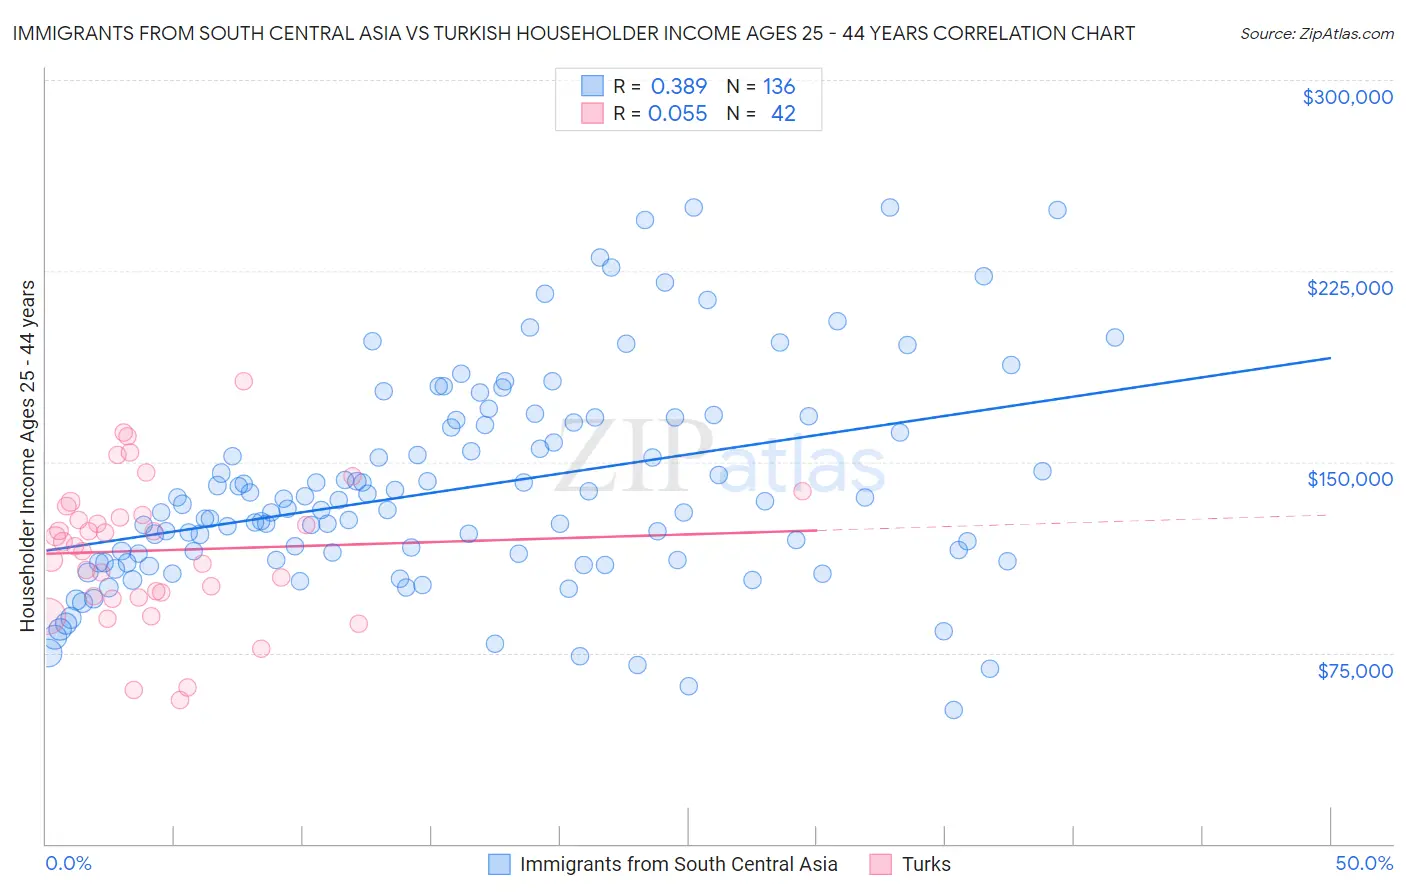 Immigrants from South Central Asia vs Turkish Householder Income Ages 25 - 44 years